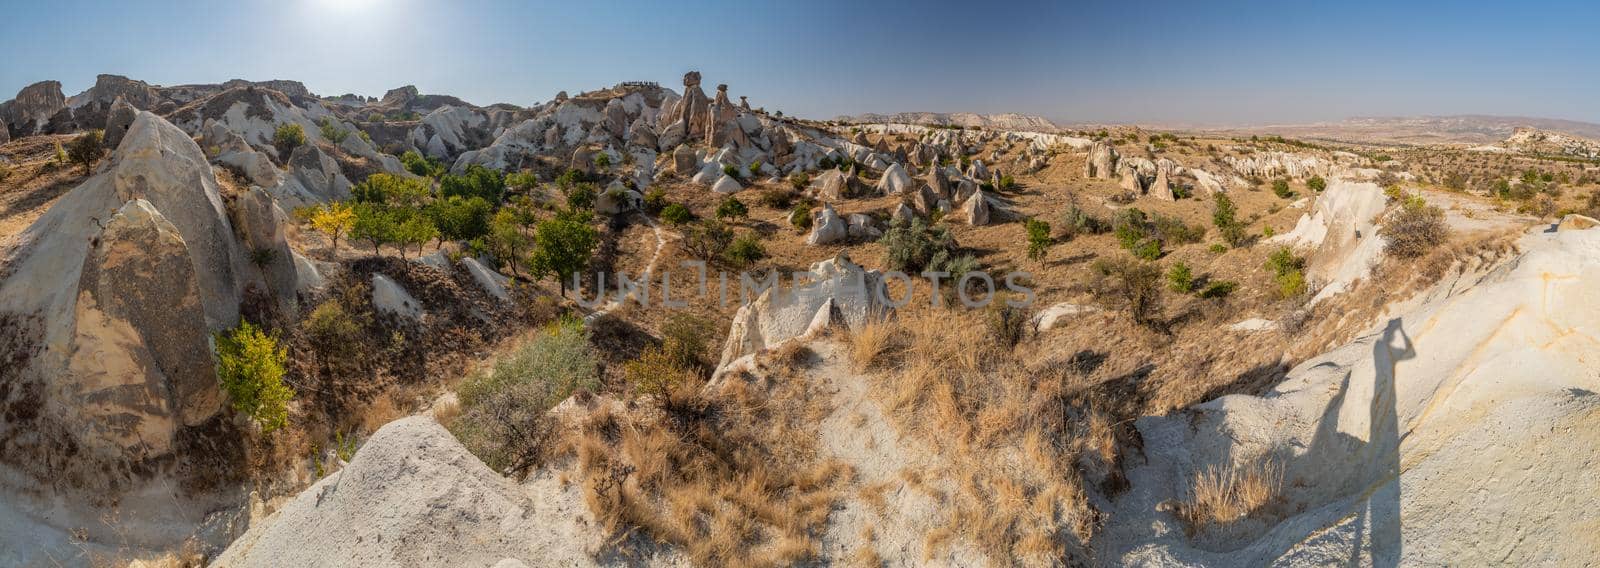 The picturesque panorama of Cappadocia at sunset, amazing Turkey, Mountains and rock formation, big size image, Goreme national park, Love valley, open air museum, ancient region of Anatolia, Unesco. High quality photo